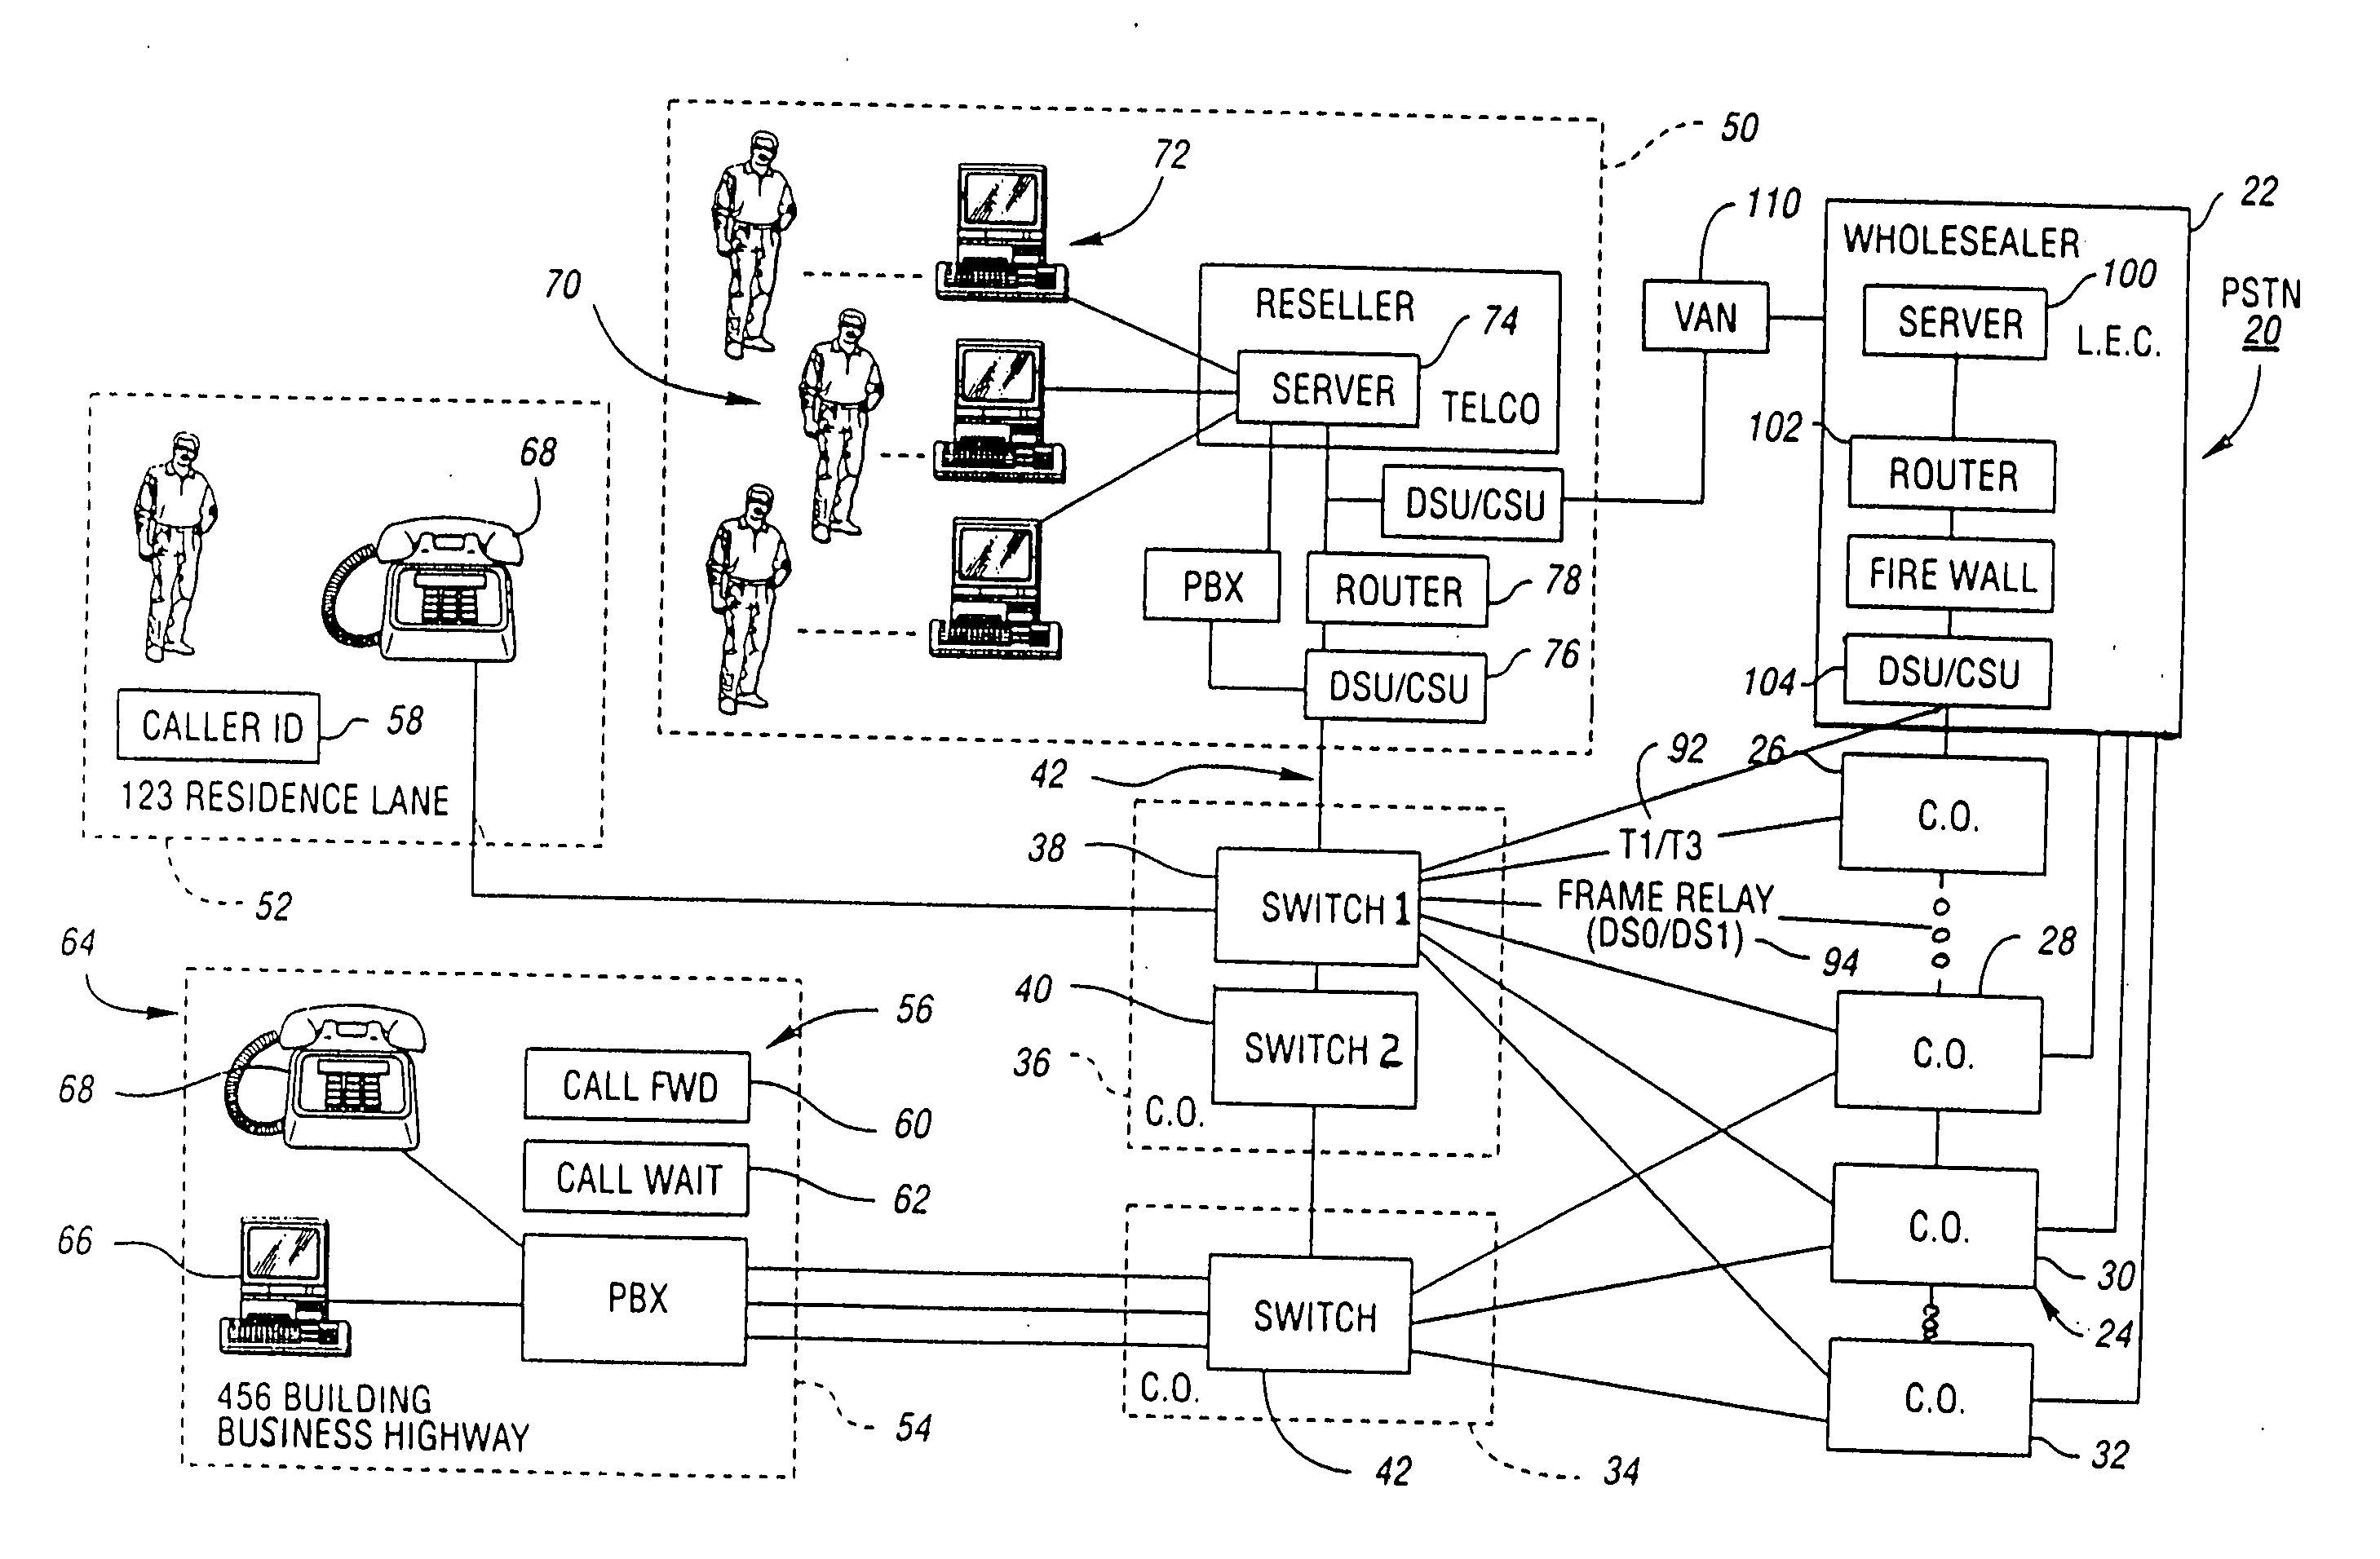 Transaction sets for automated electronic ordering of telecommunications products and services